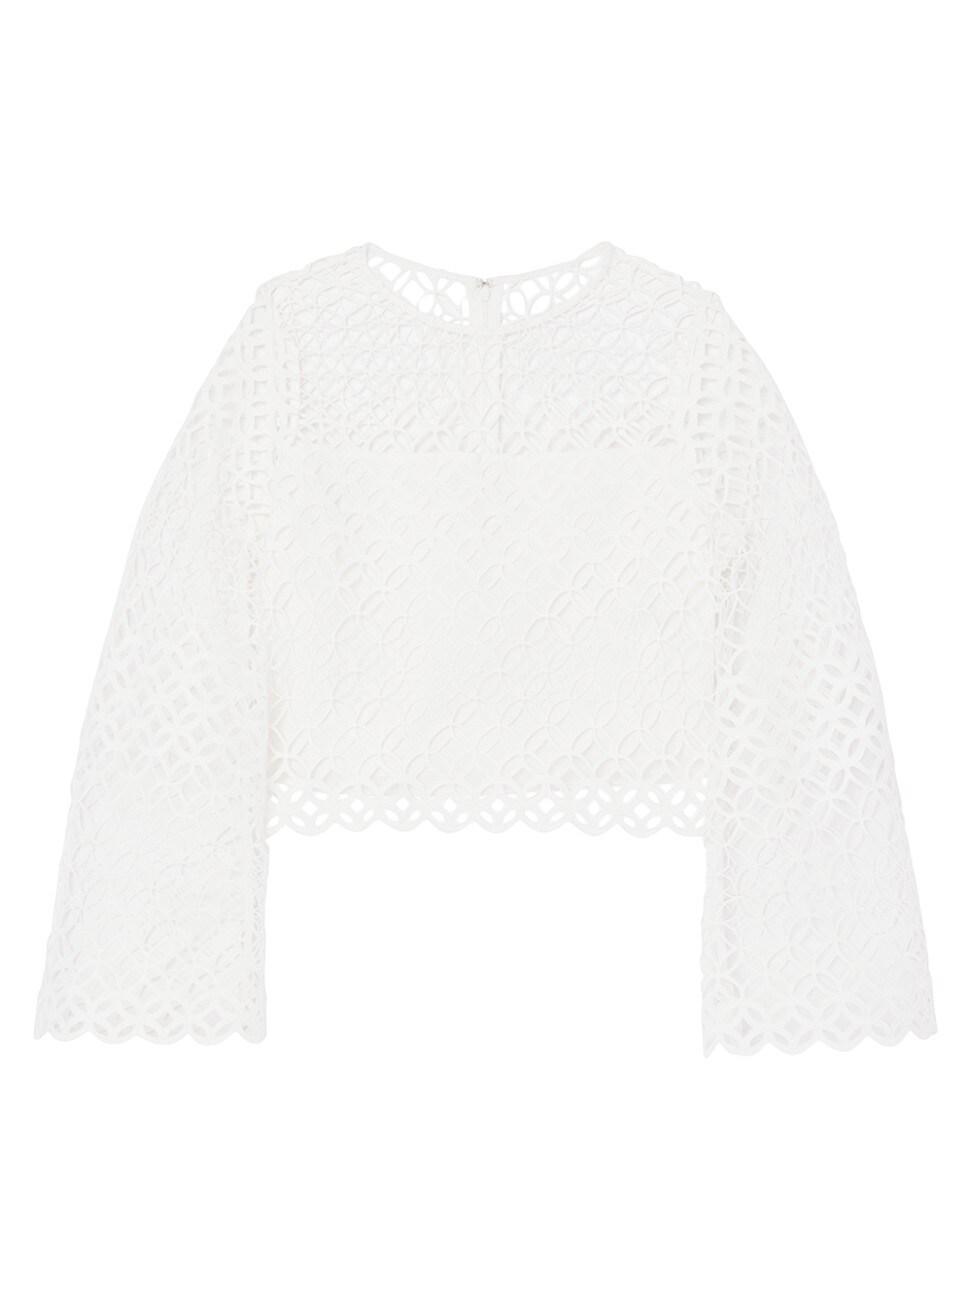 MILLY Neiva Geo Lace Top in White | Lyst